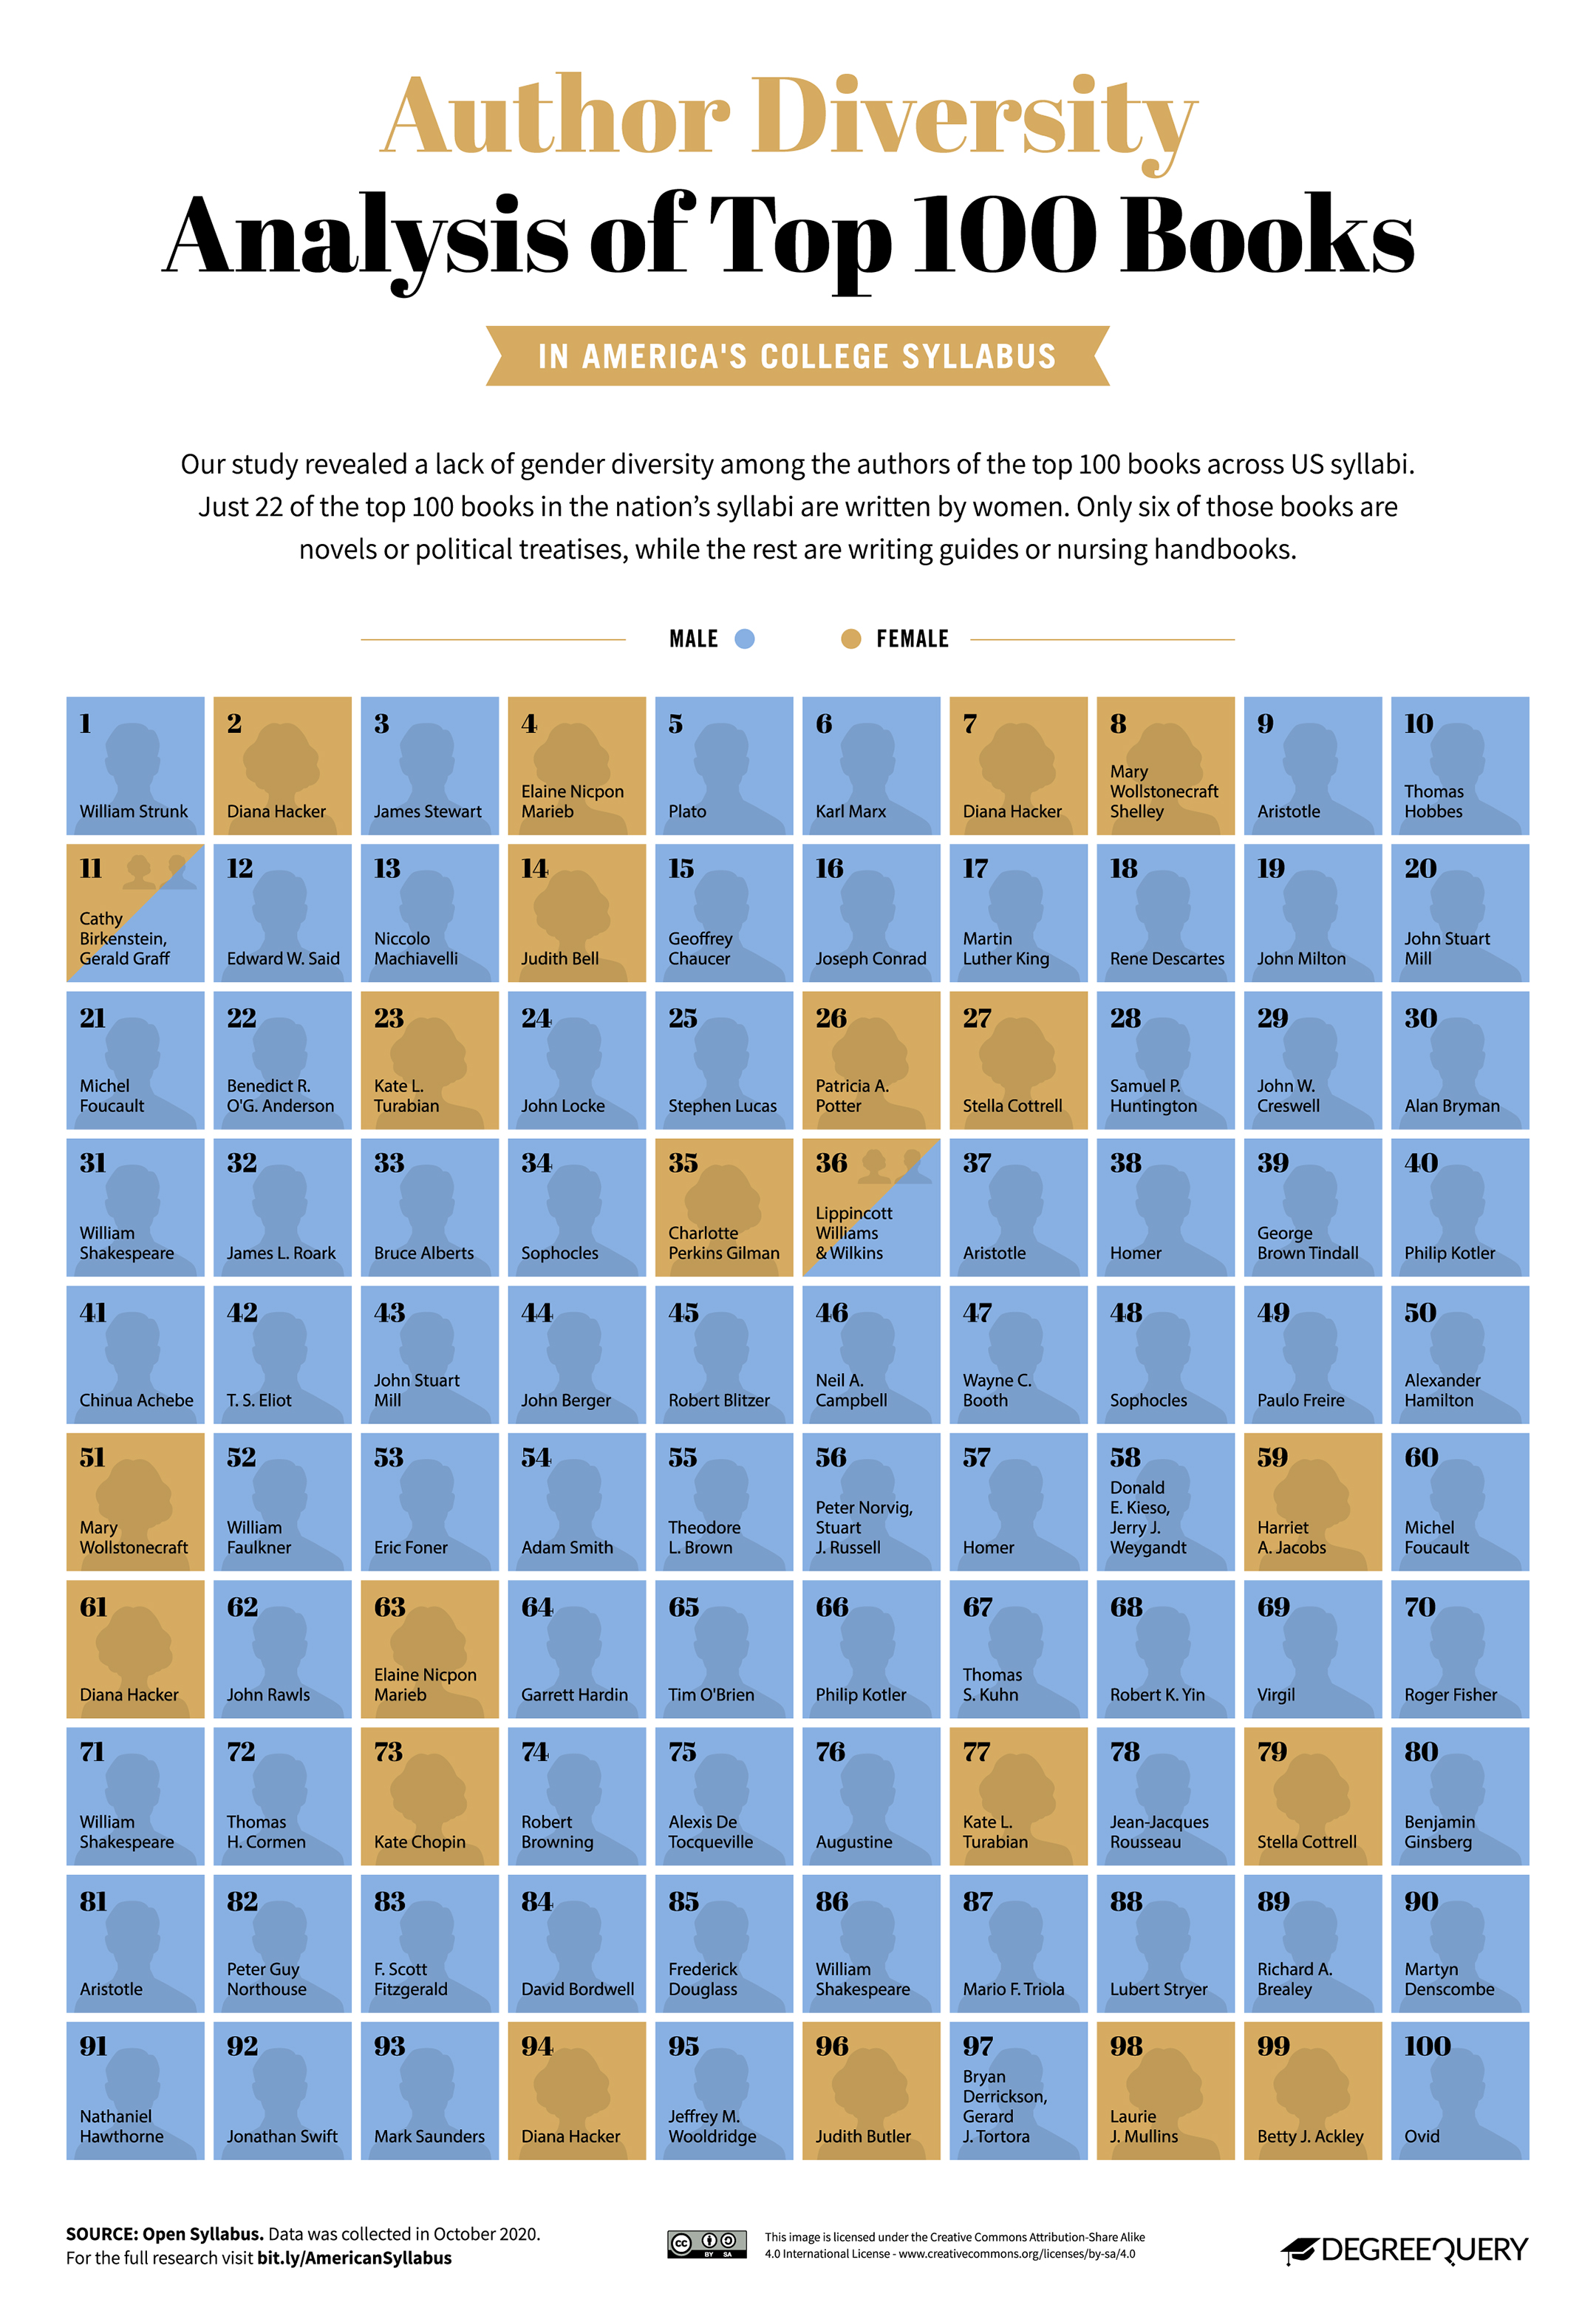 Infographic showing the gender breakdown of the authors of the most assigned books at american colleges. The information is organized in a 10 by 10 grid of squares, with male authors shaded blue and female authors shaded yellow.